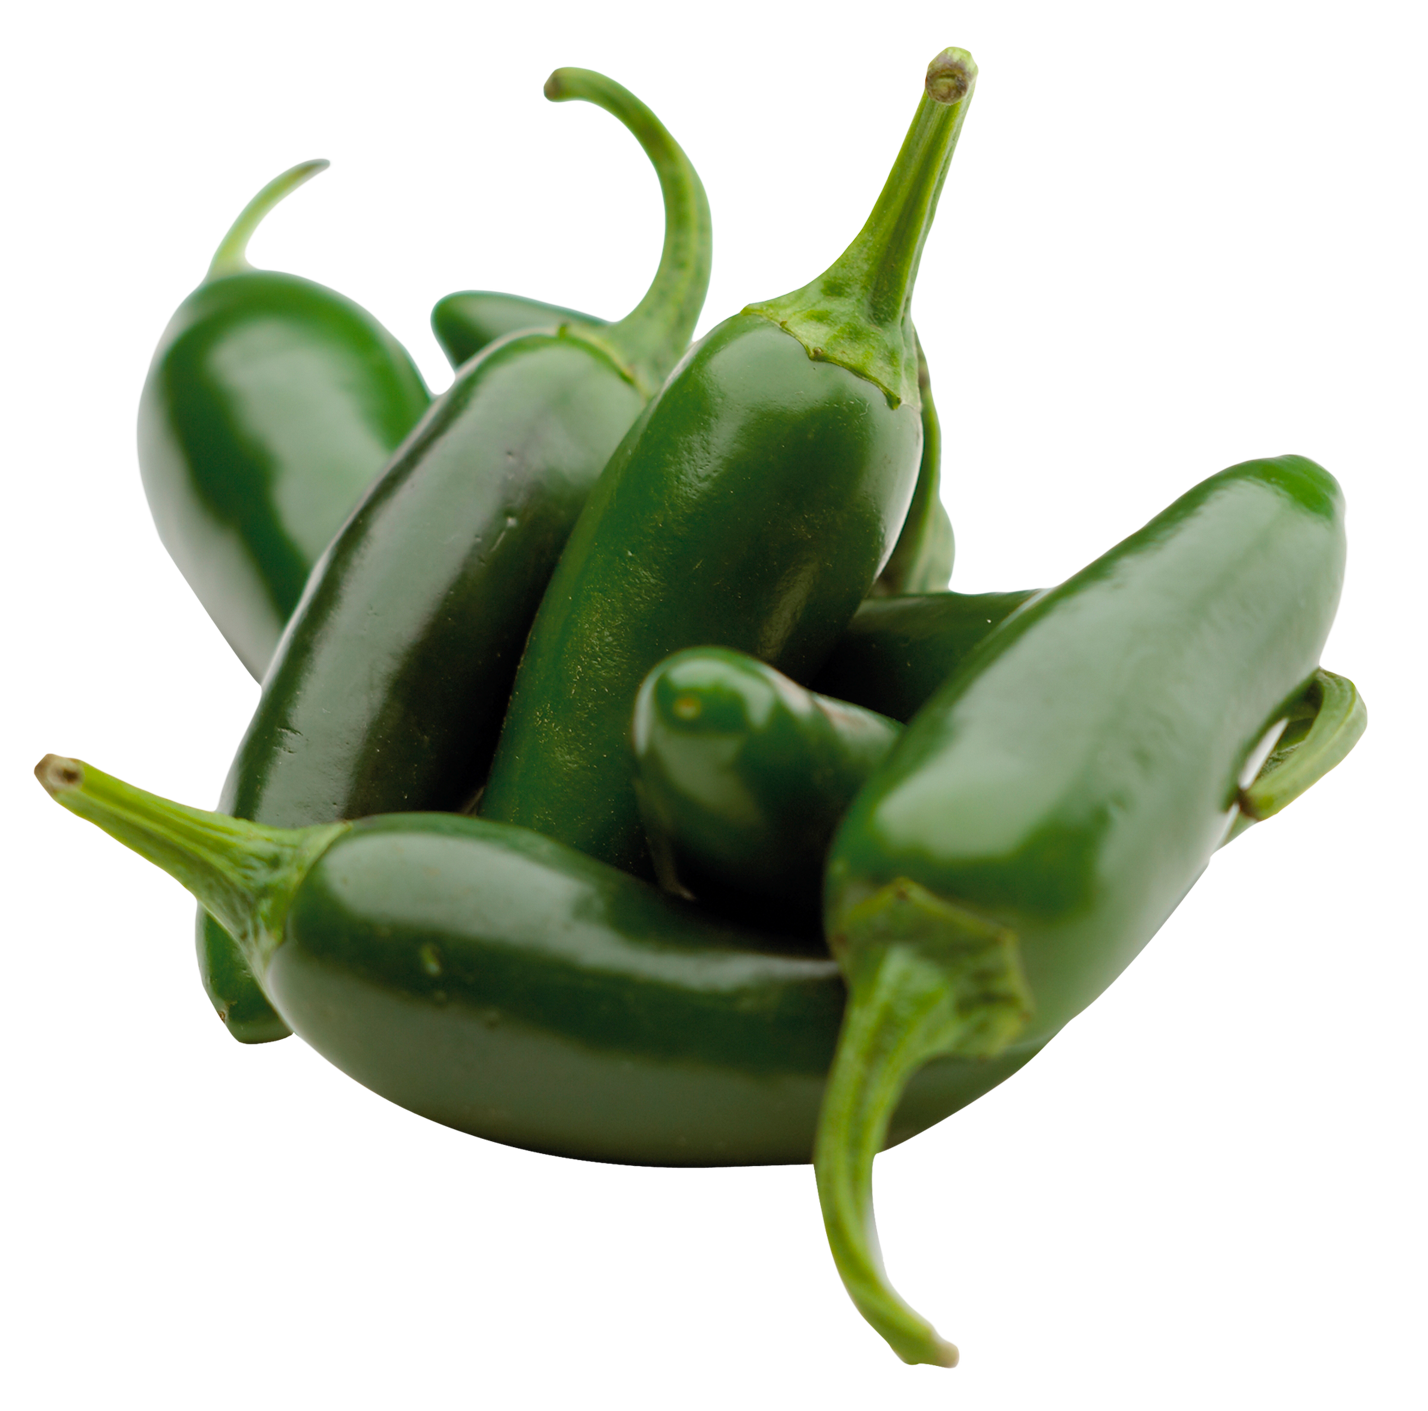 Jalapeno clipart green vegetable. Chili pepper png image